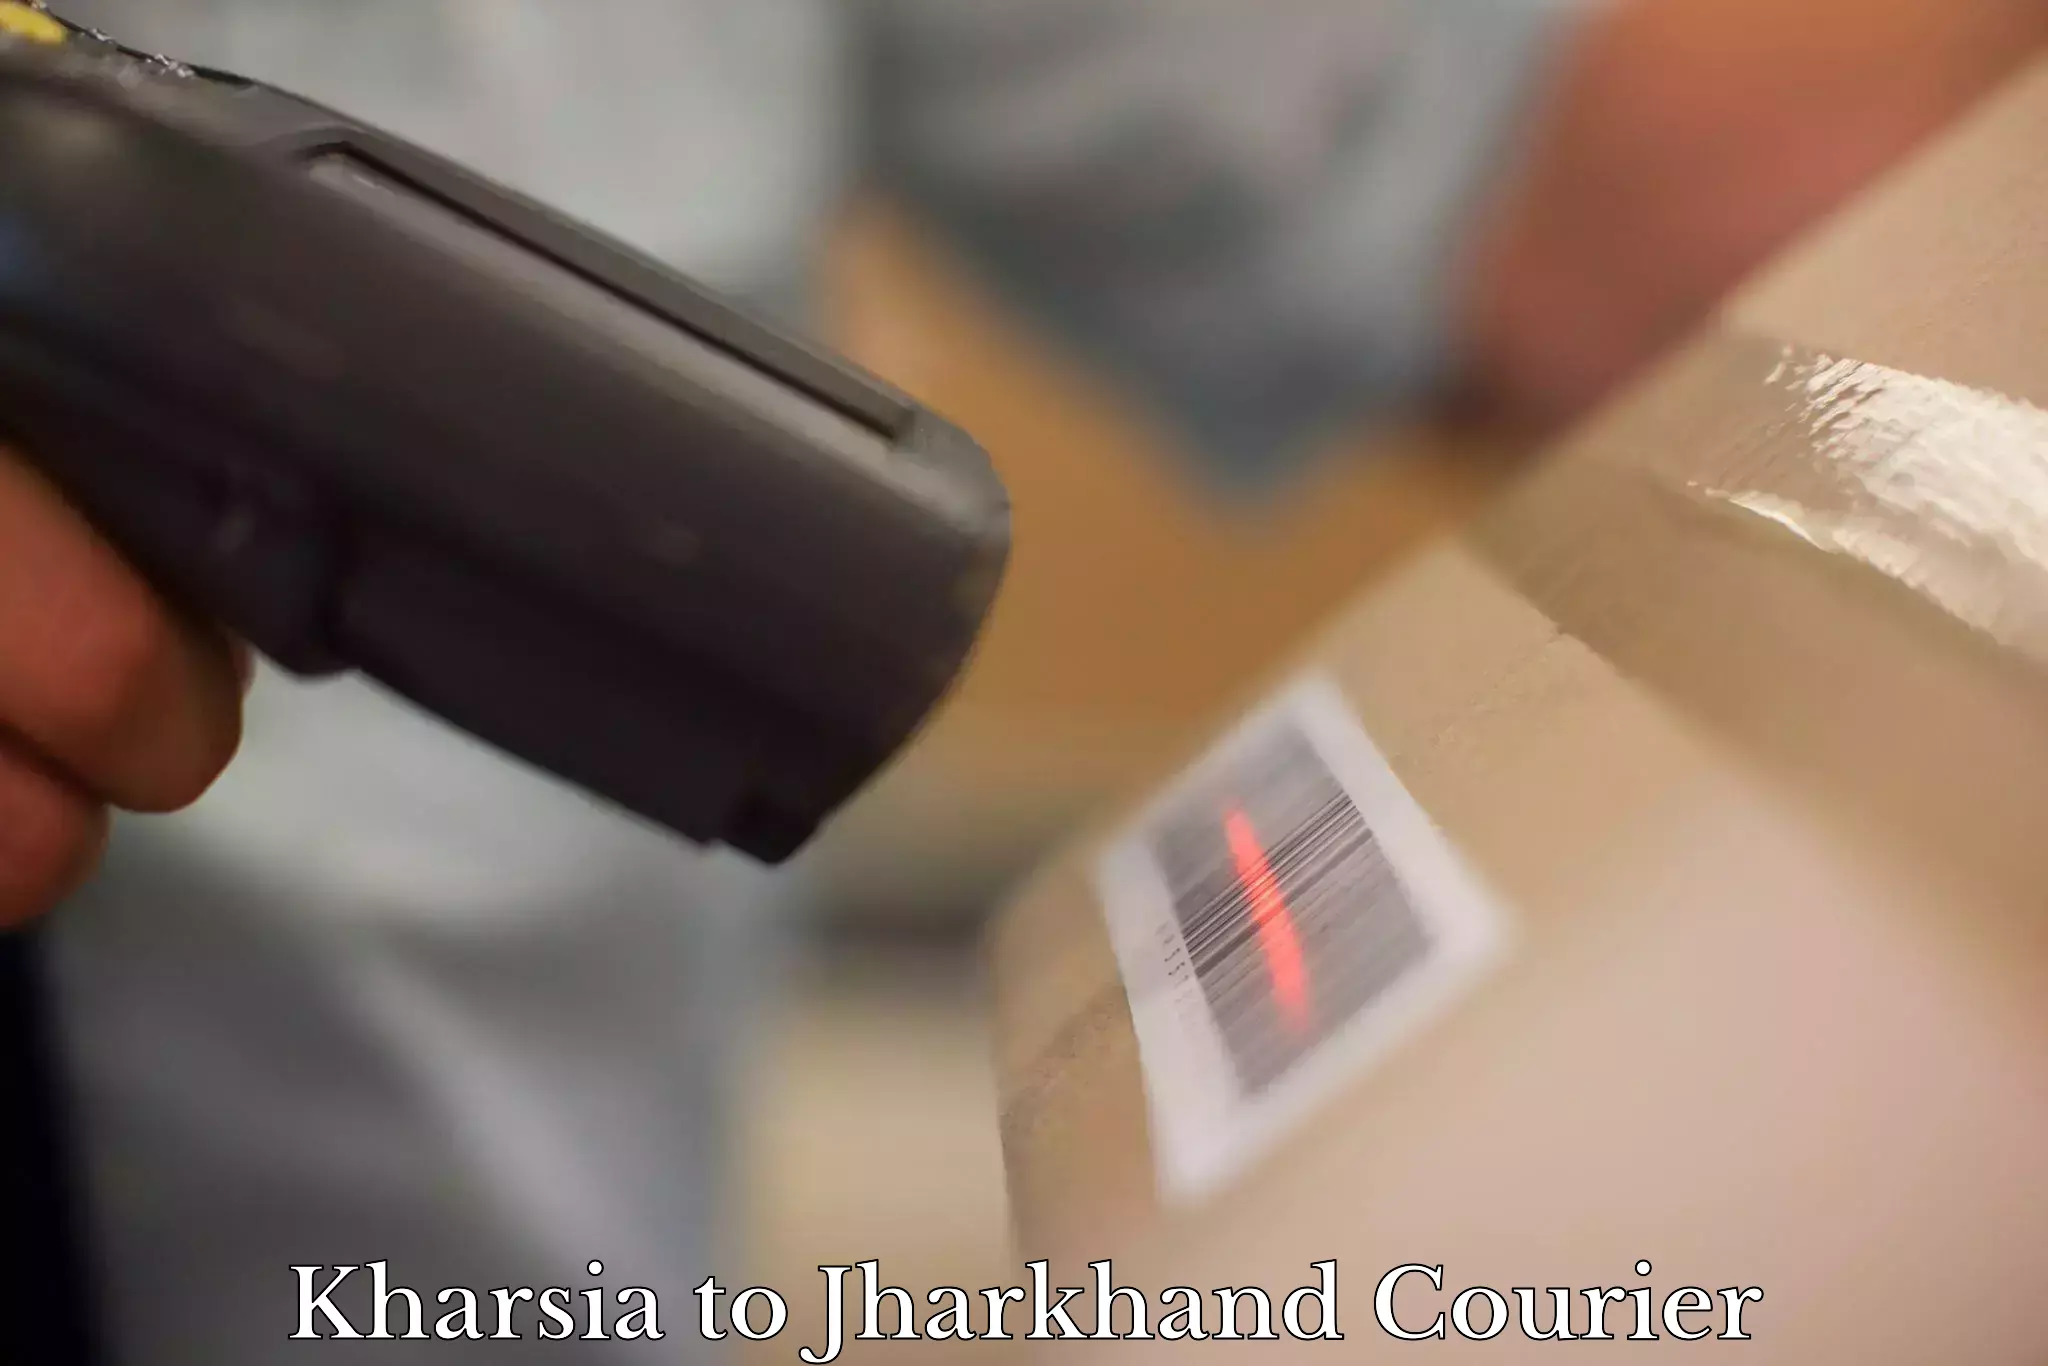 Trusted relocation experts Kharsia to Domchanch